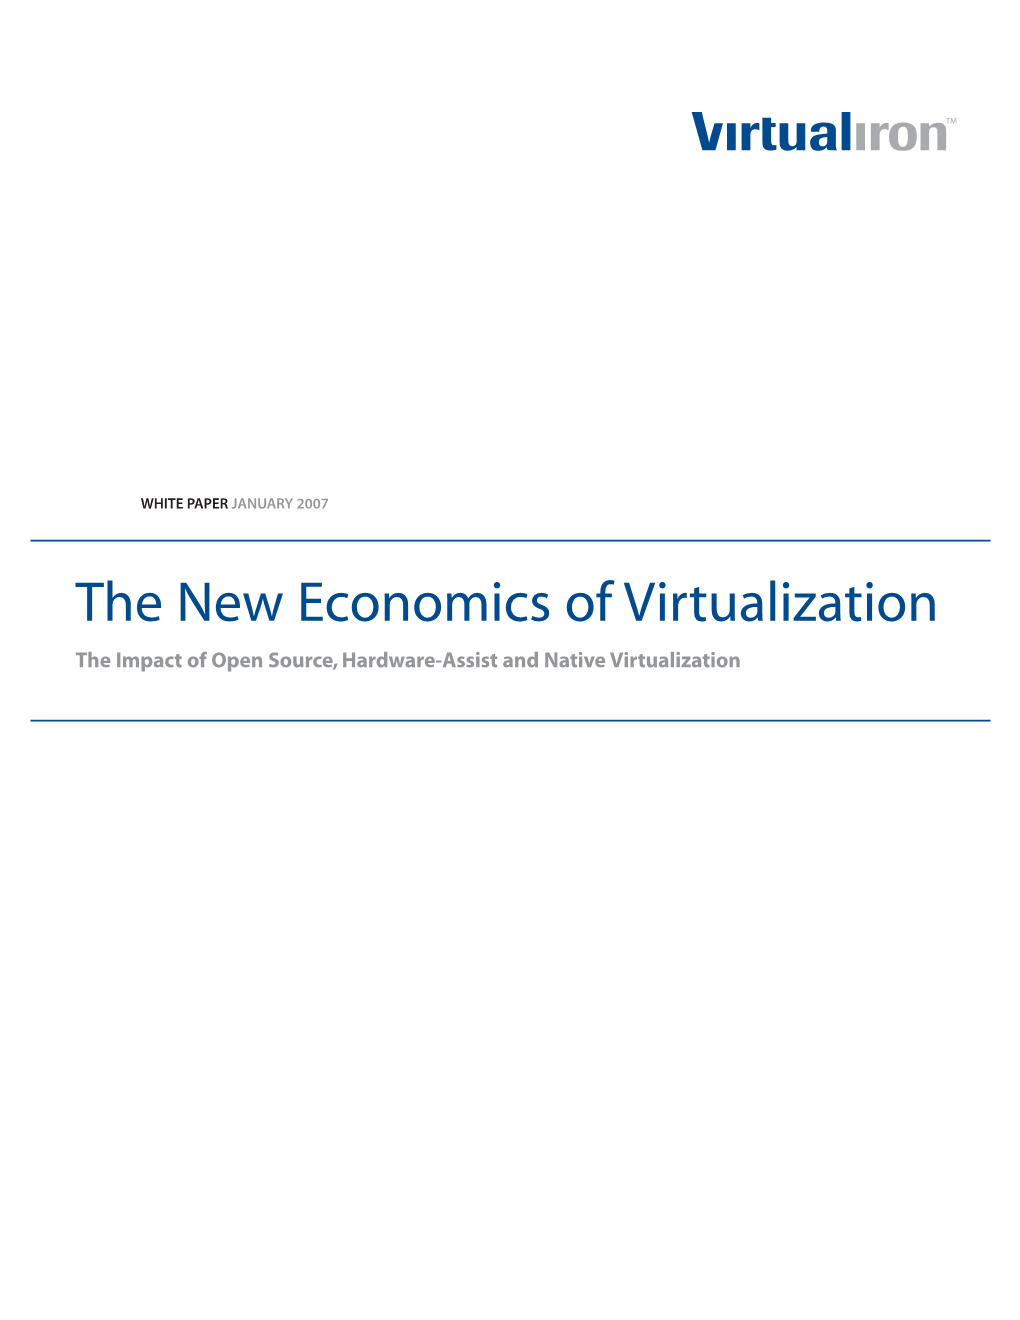 The New Economics of Virtualization the Impact of Open Source, Hardware-Assist and Native Virtualization TABLE of CONTENTS Introduction